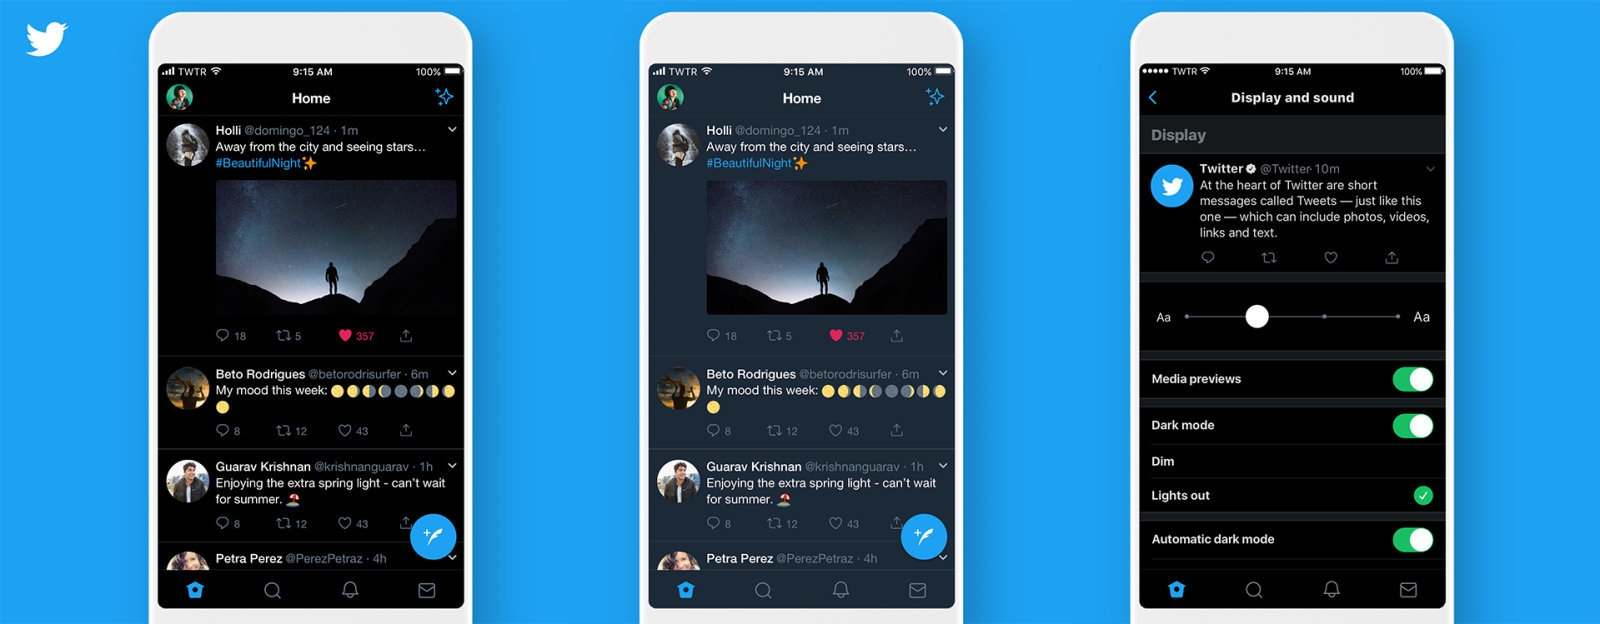 Twitter adds swipe-to-like and true dark mode to its prototype app | DeviceDaily.com